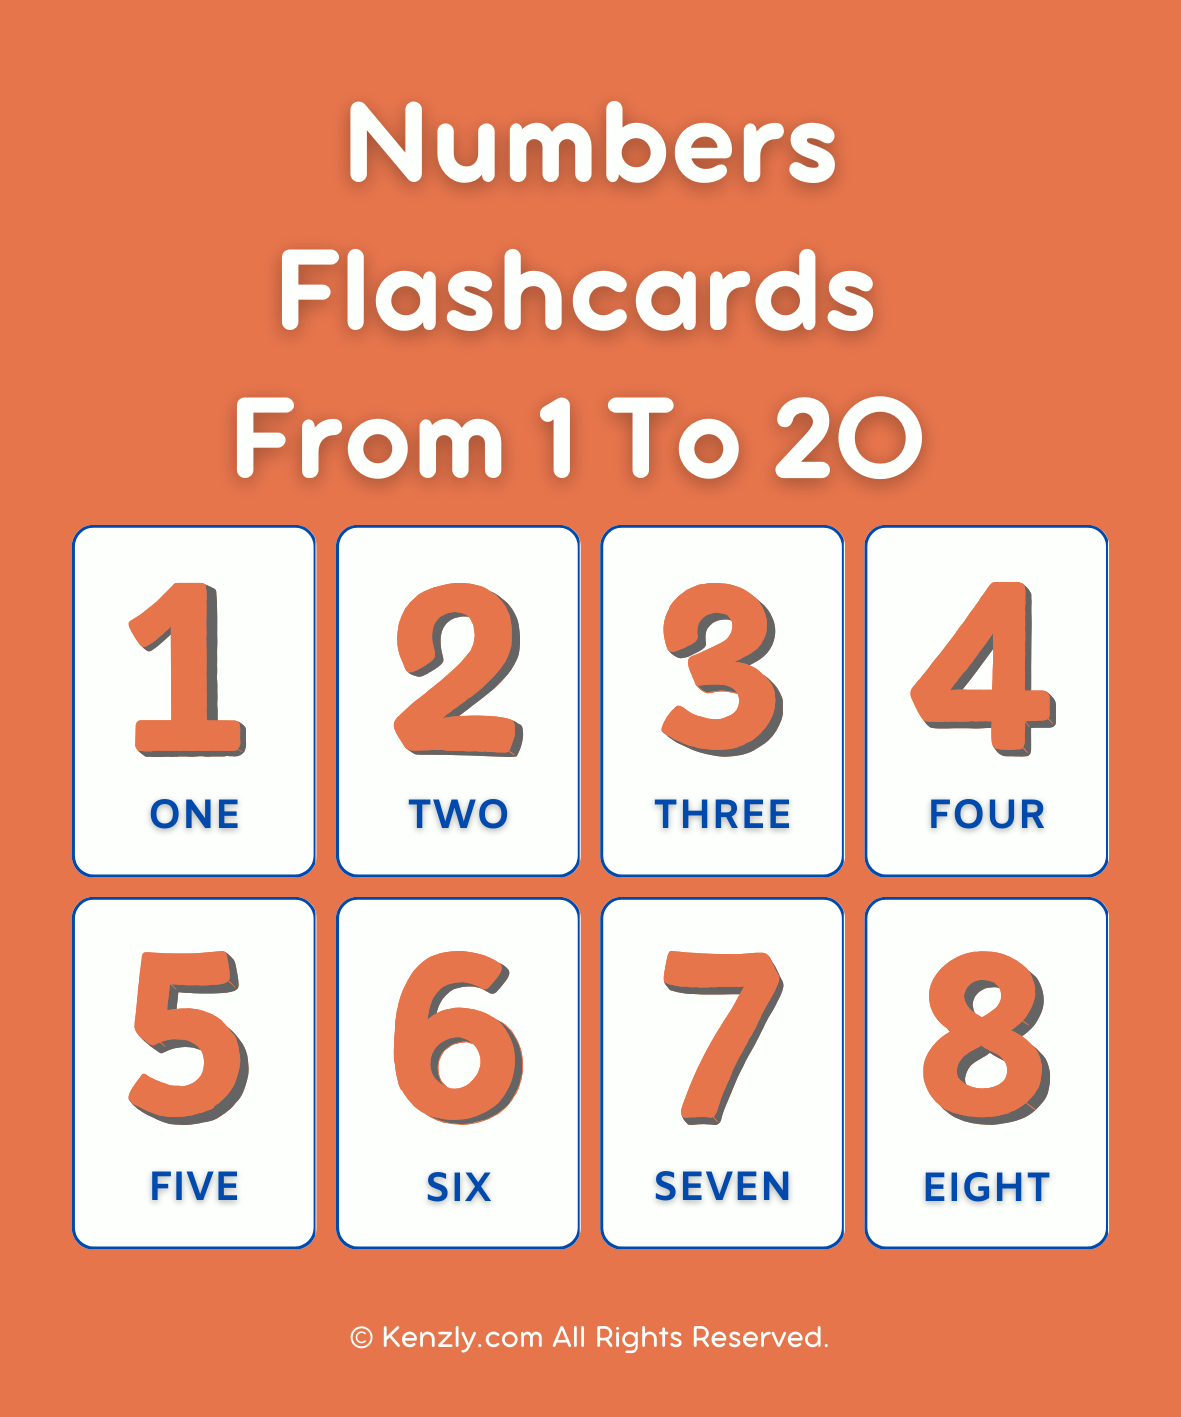 Numbers Flashcards From 1 To 20